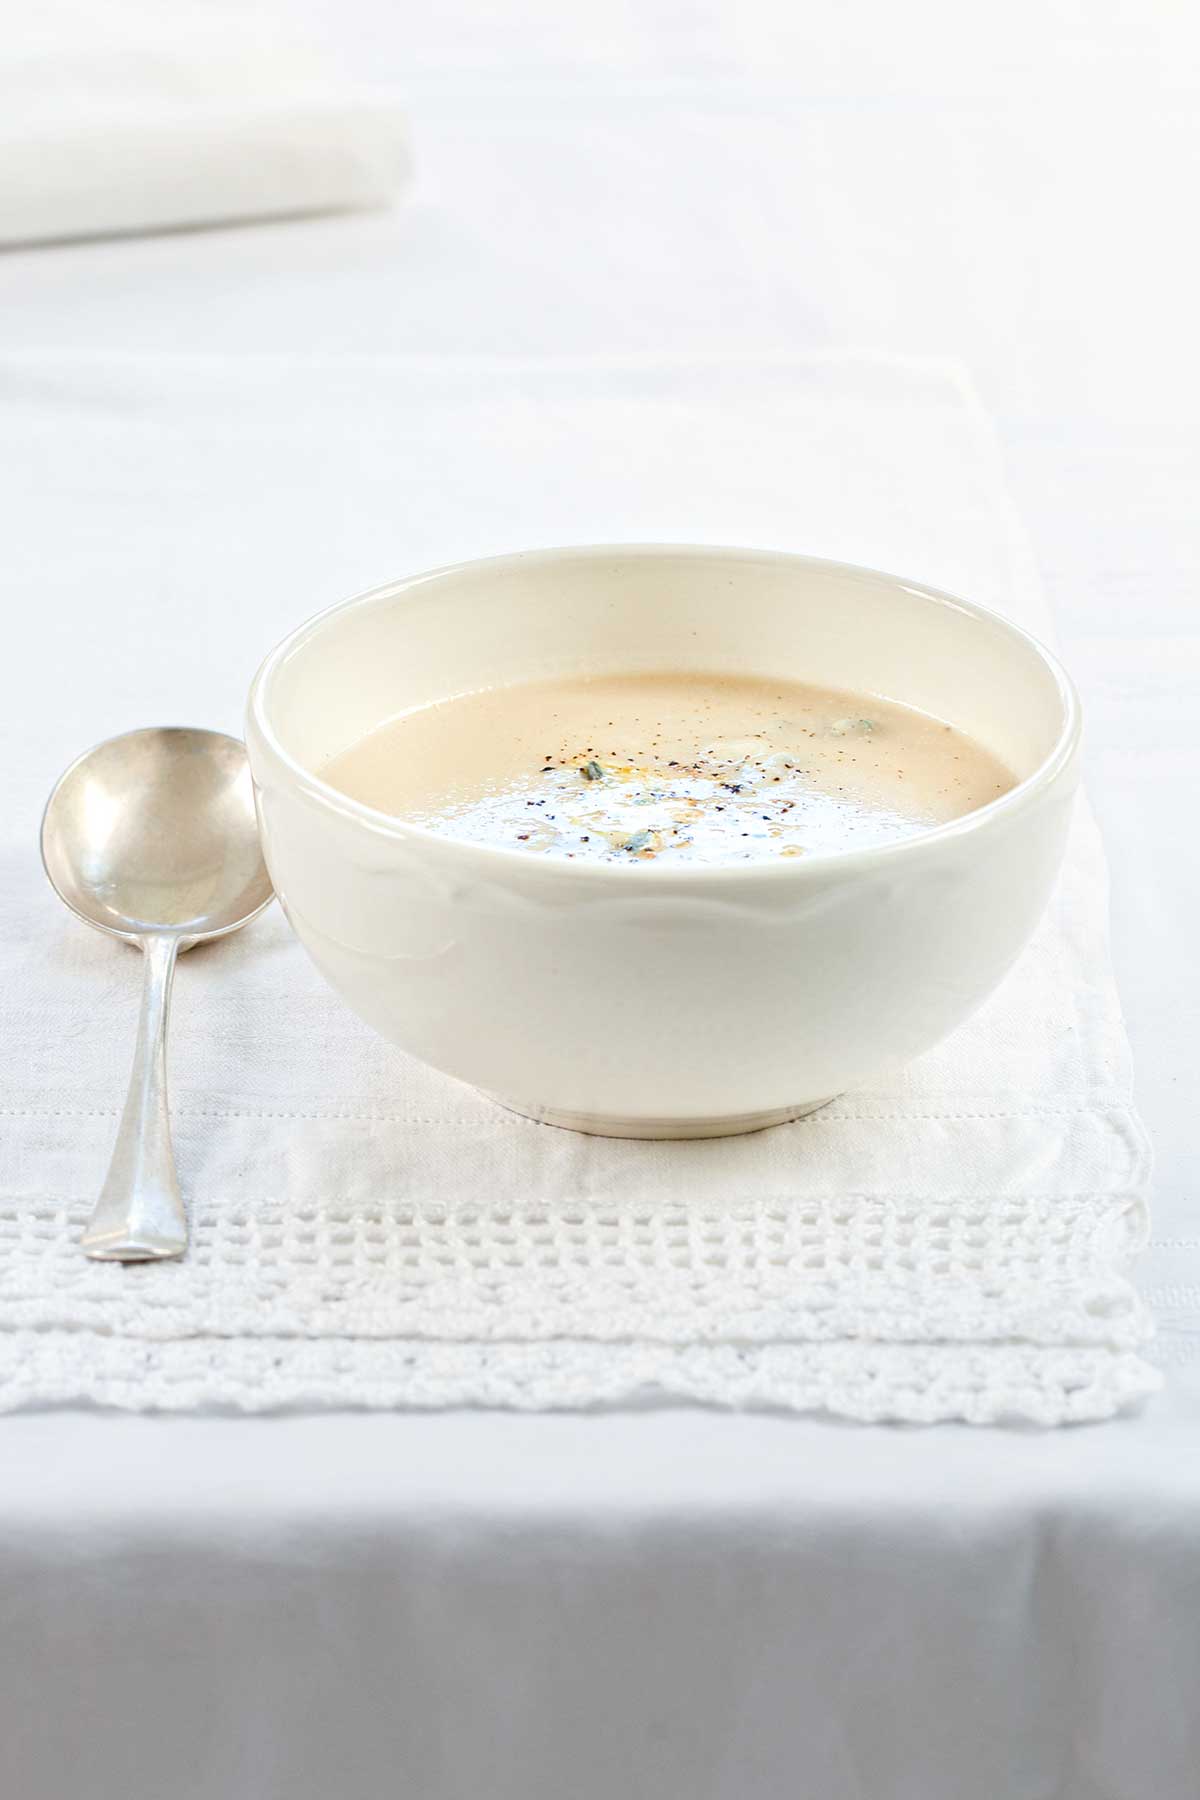 A white bowl of cauliflower soup on a white linen cloth, with a spoon next to it.